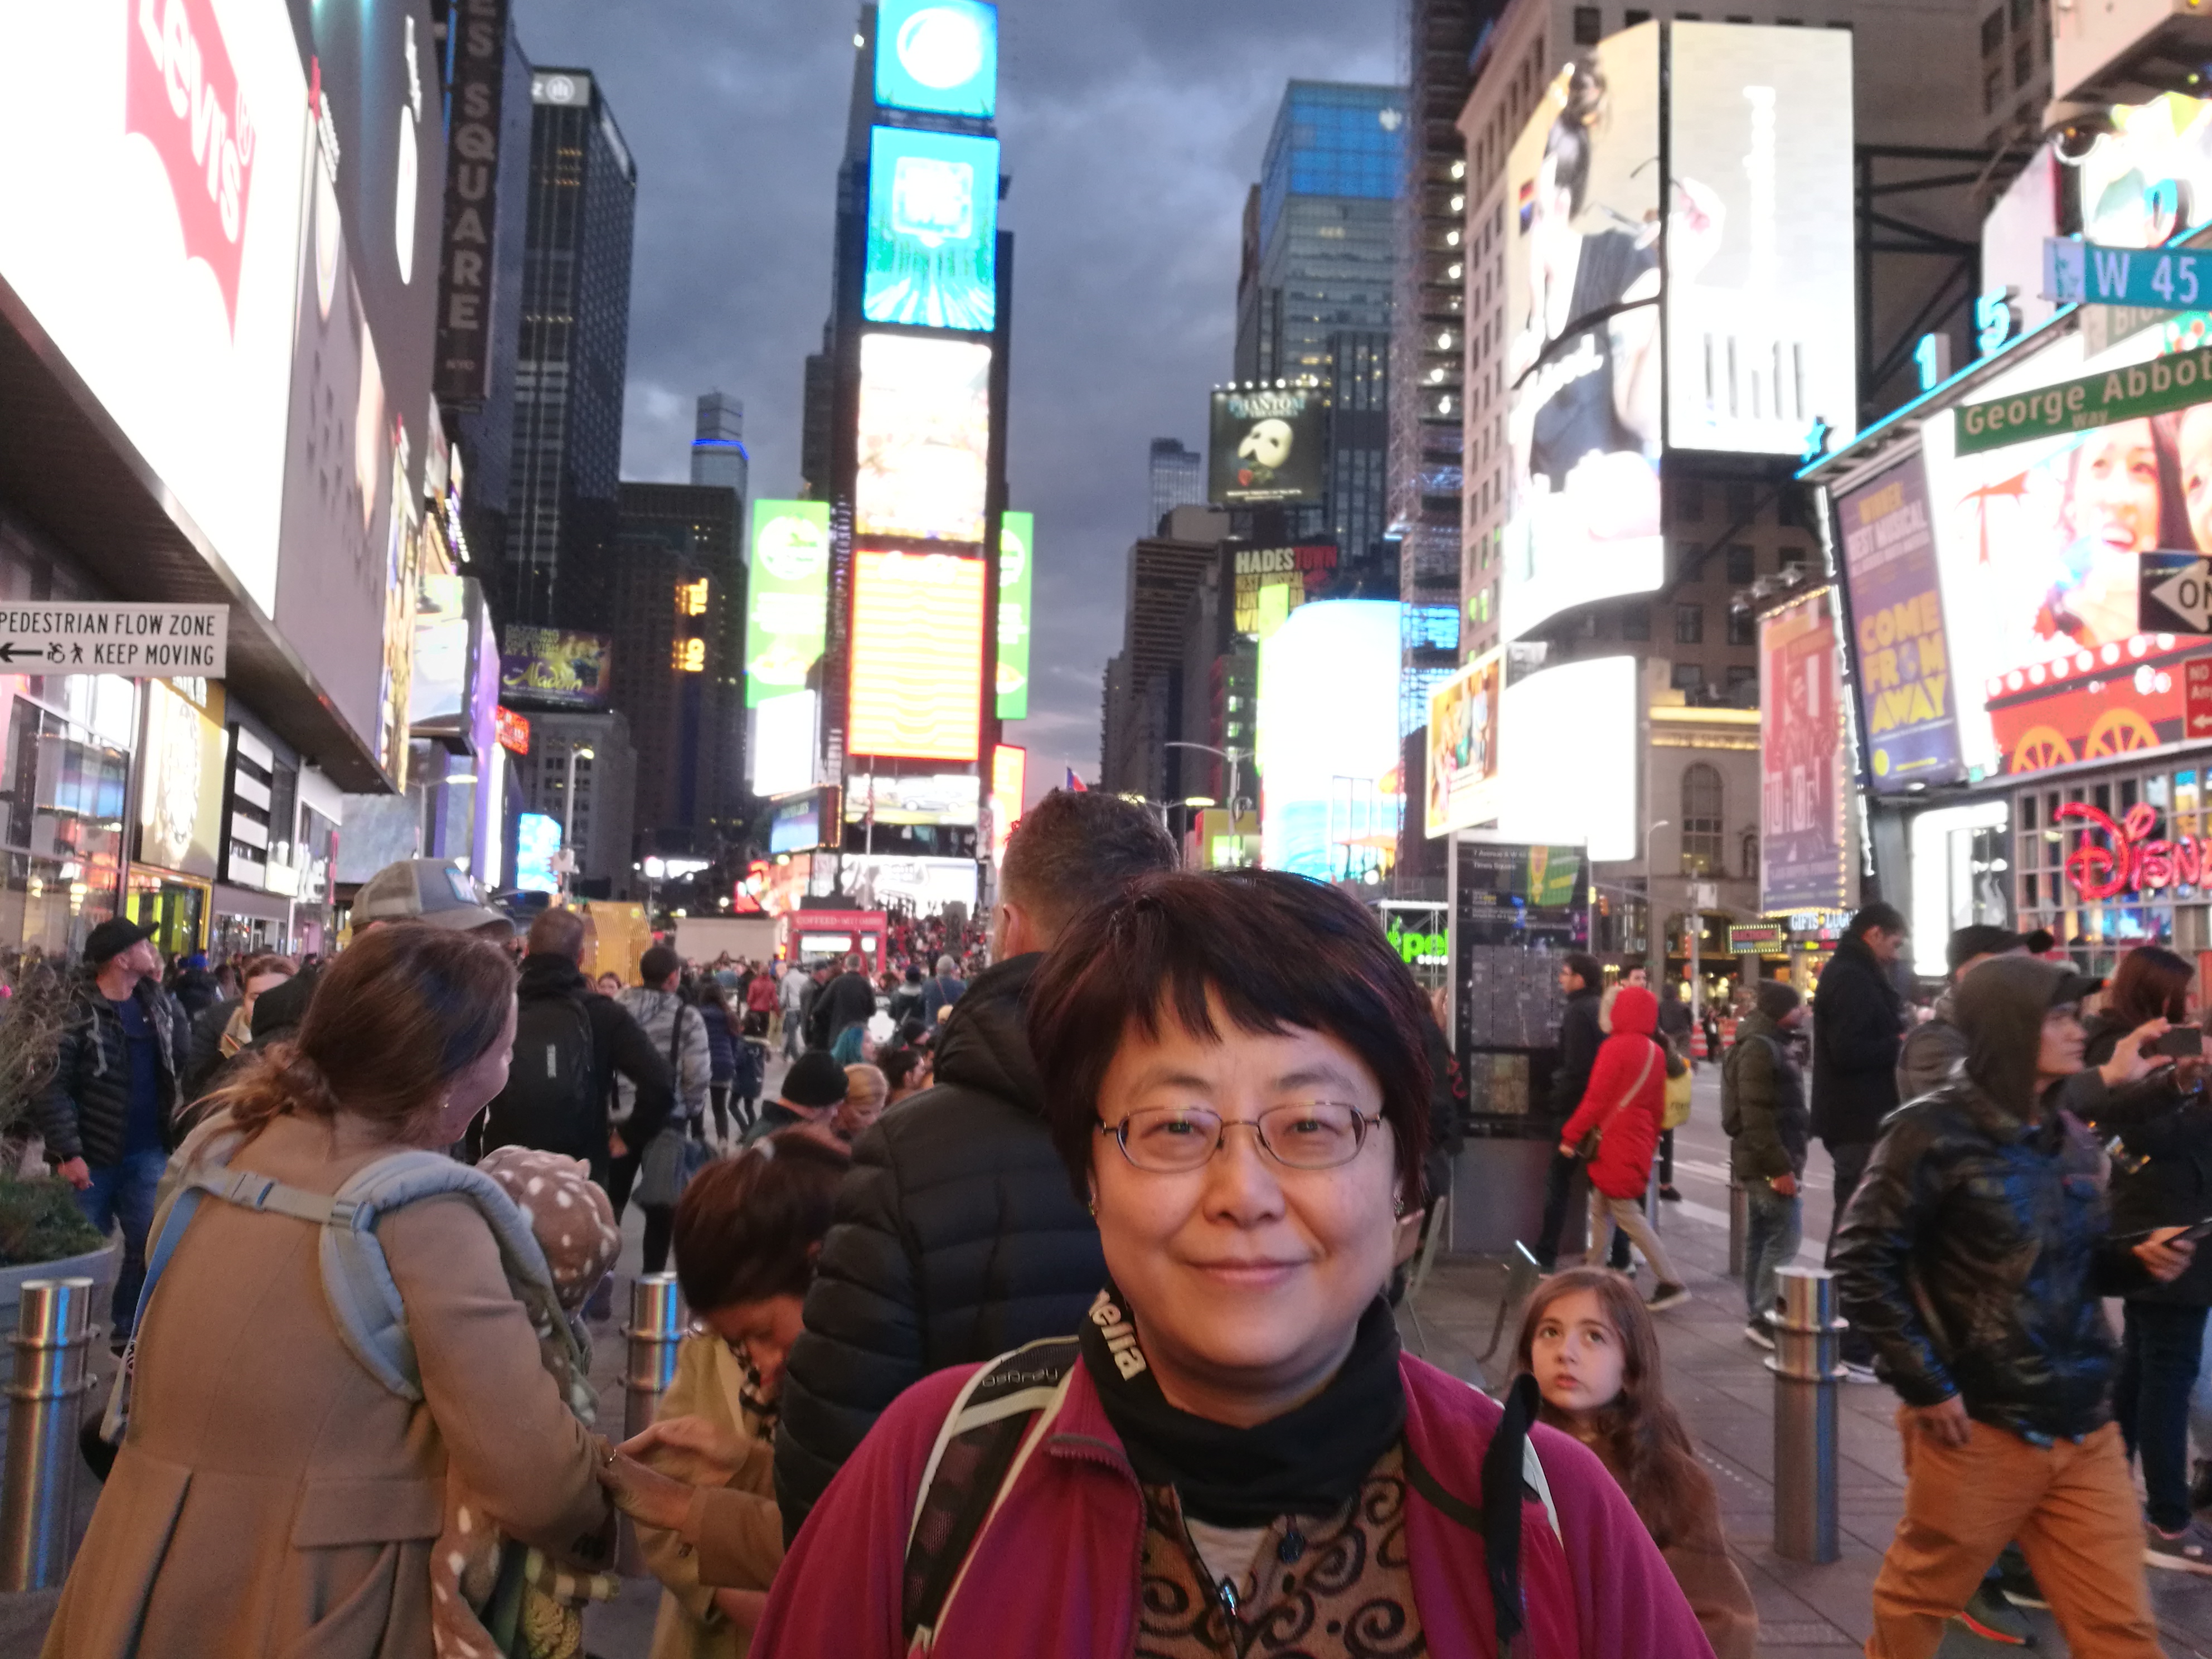 Me at Time Square